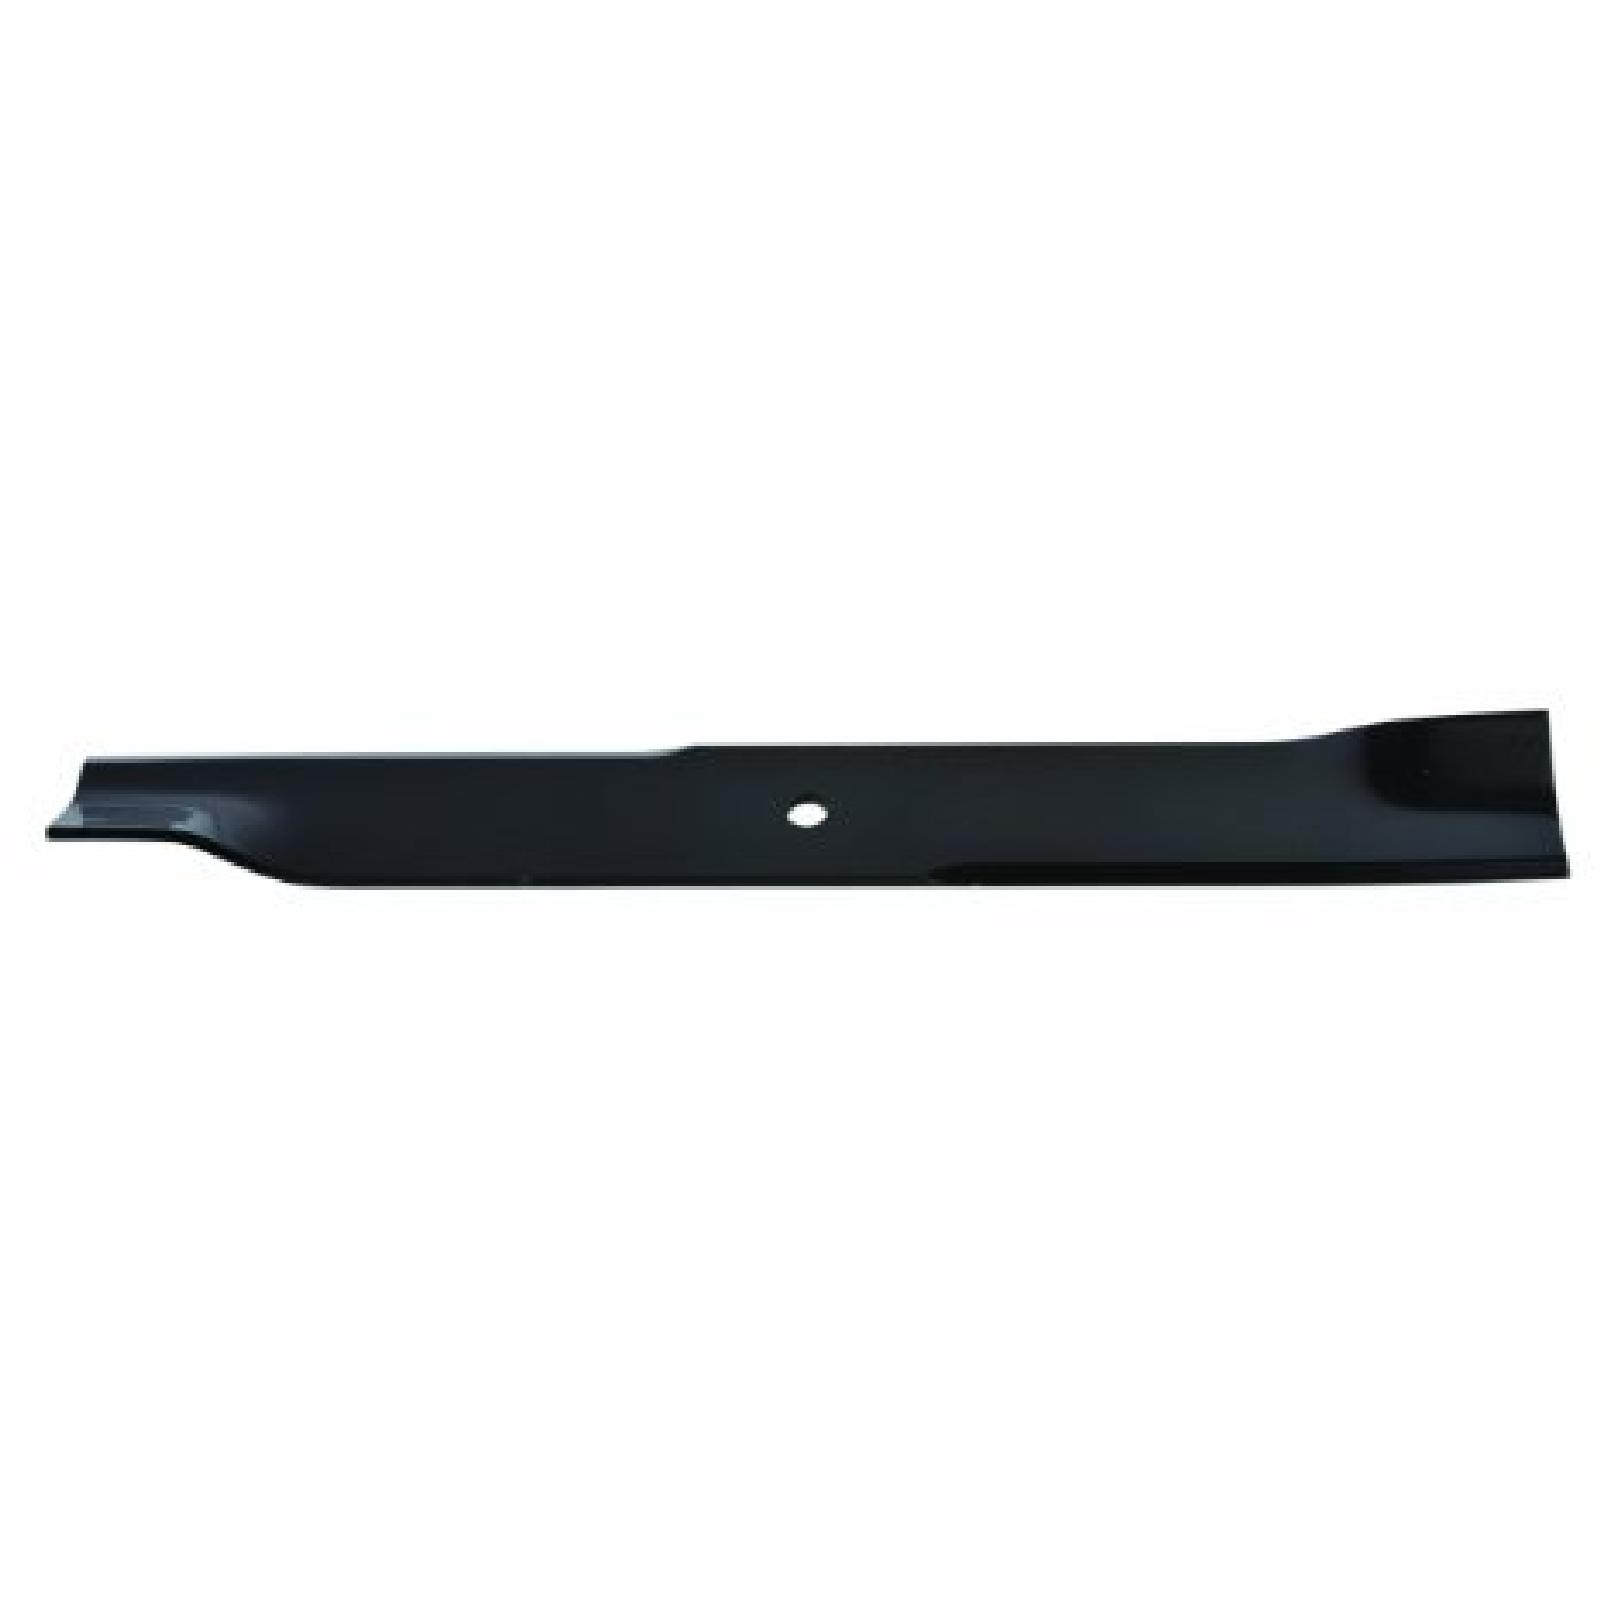 BLADE , EXMARK 103 3233 5 , part# 91-188 by Oregon - Click Image to Close